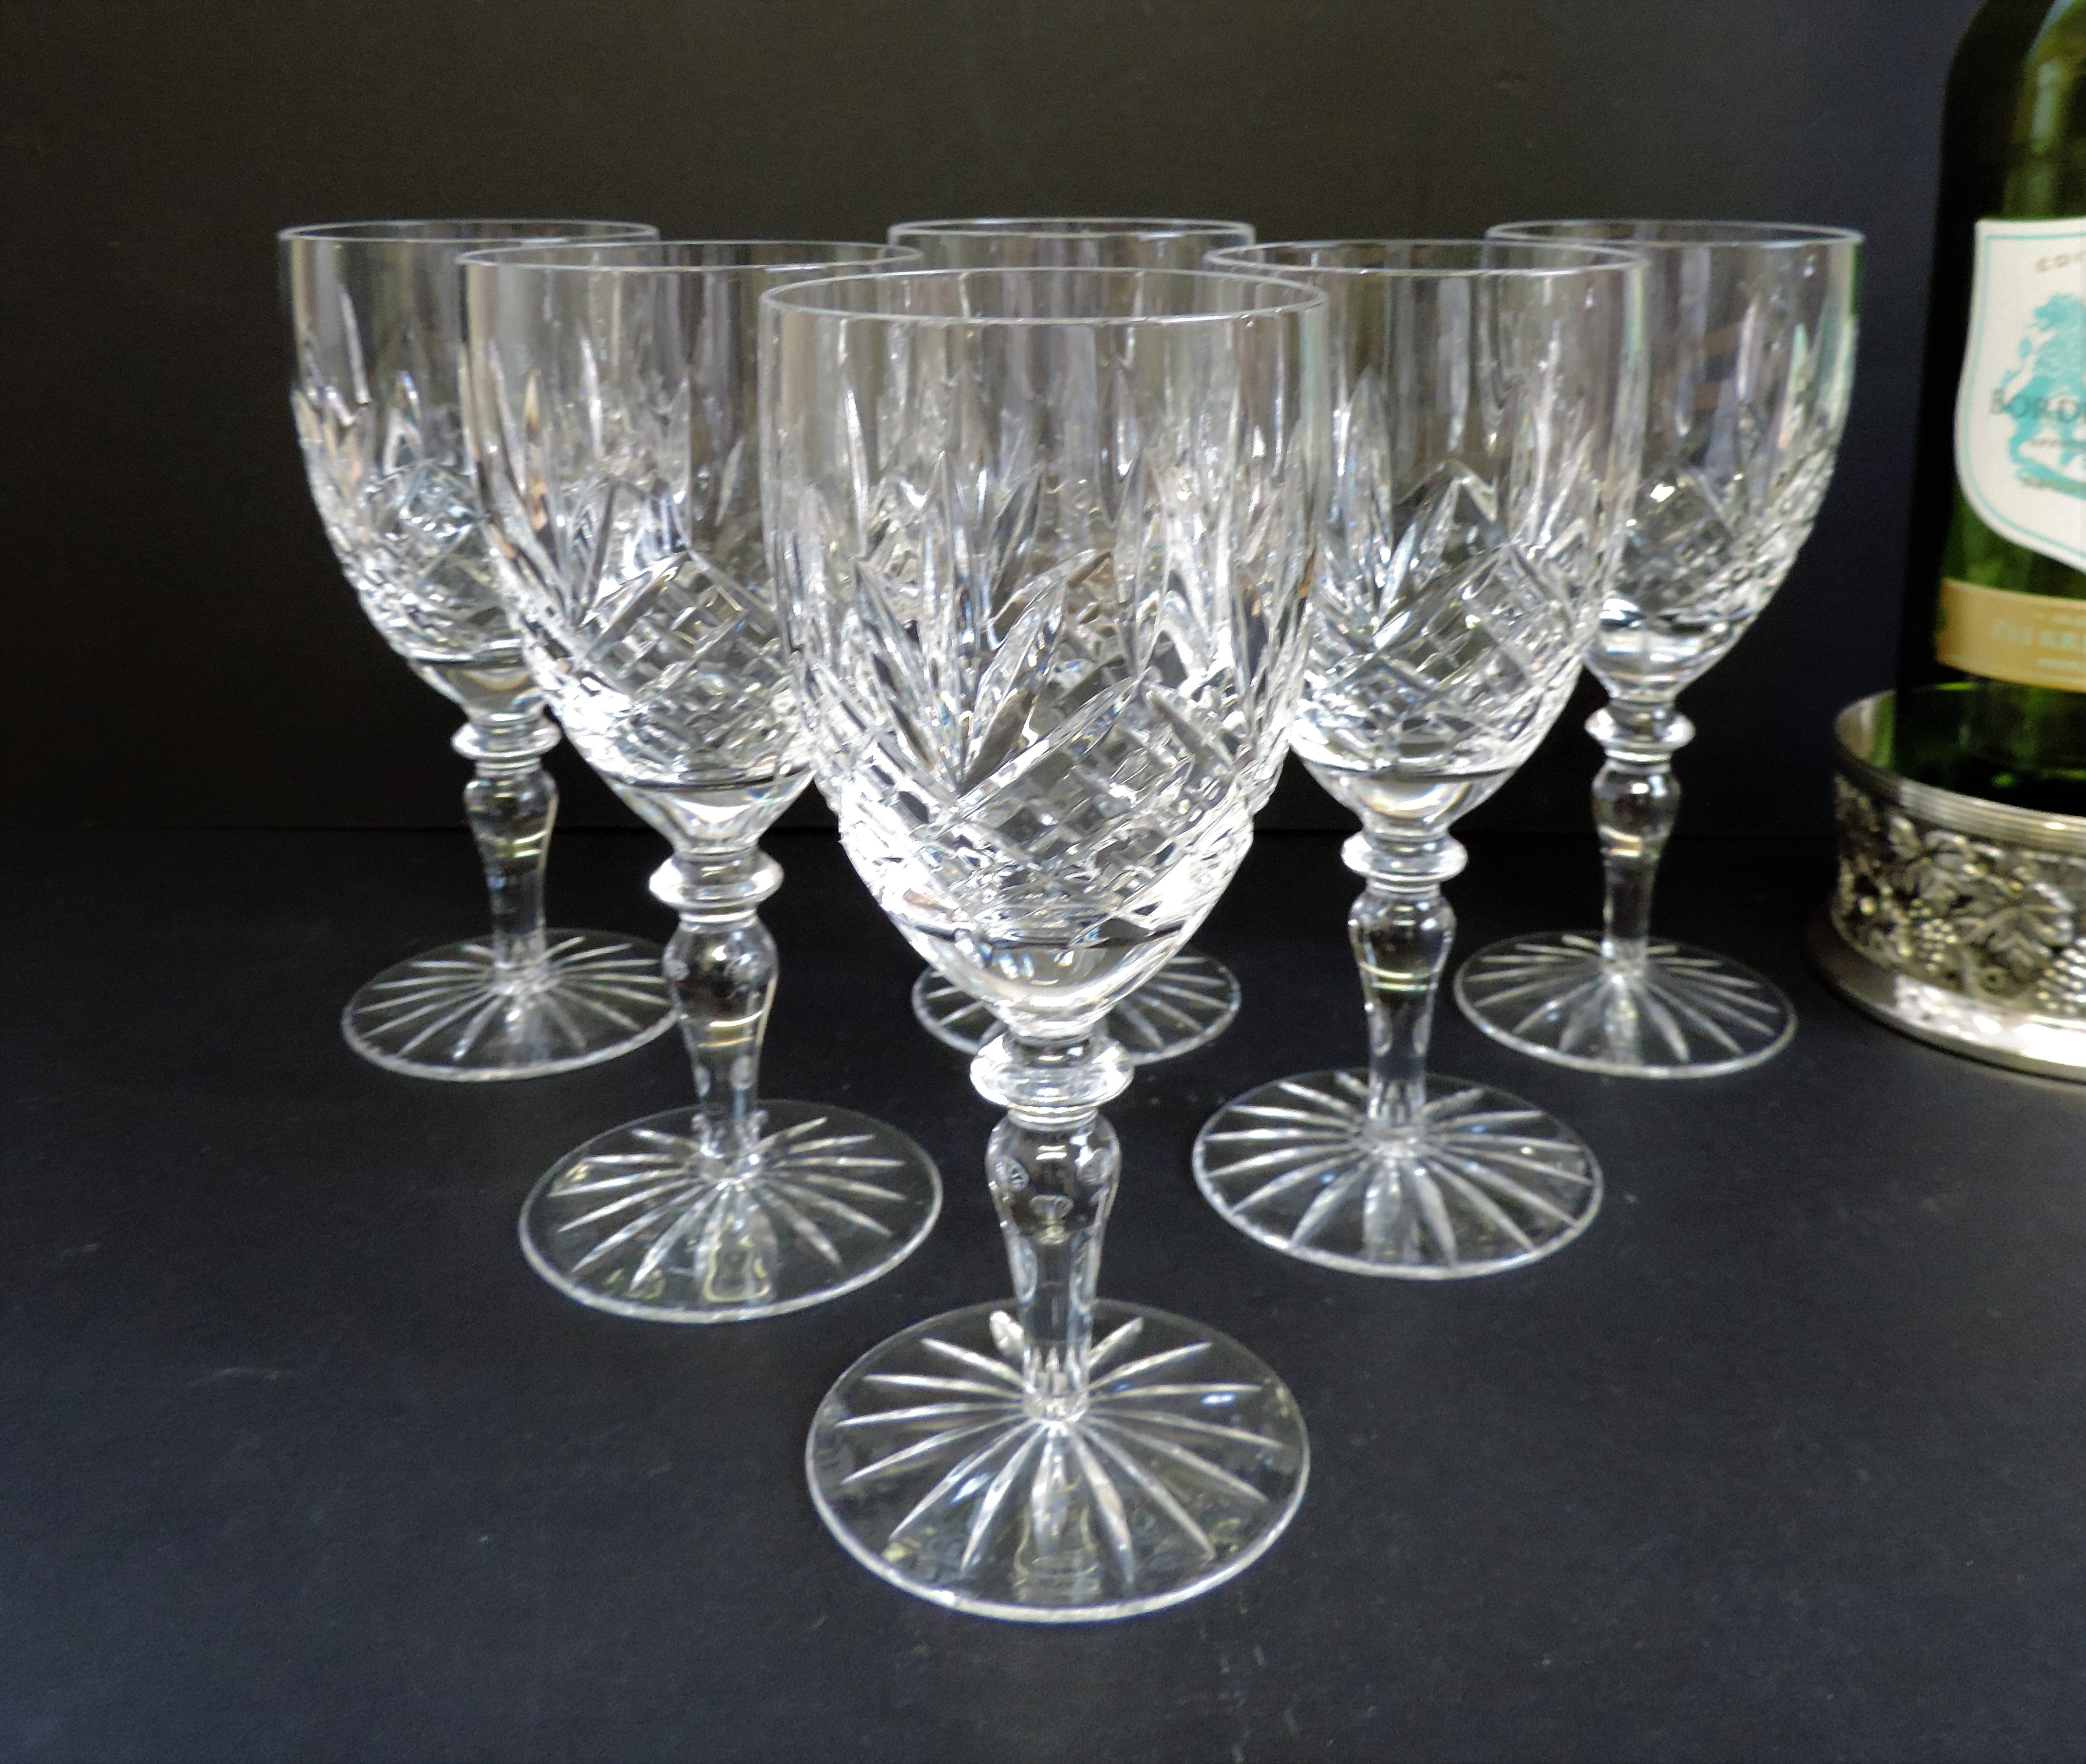 Set 6 Cut Crystal Wine Glasses & Silver Plated Bottle Coaster - Image 4 of 6